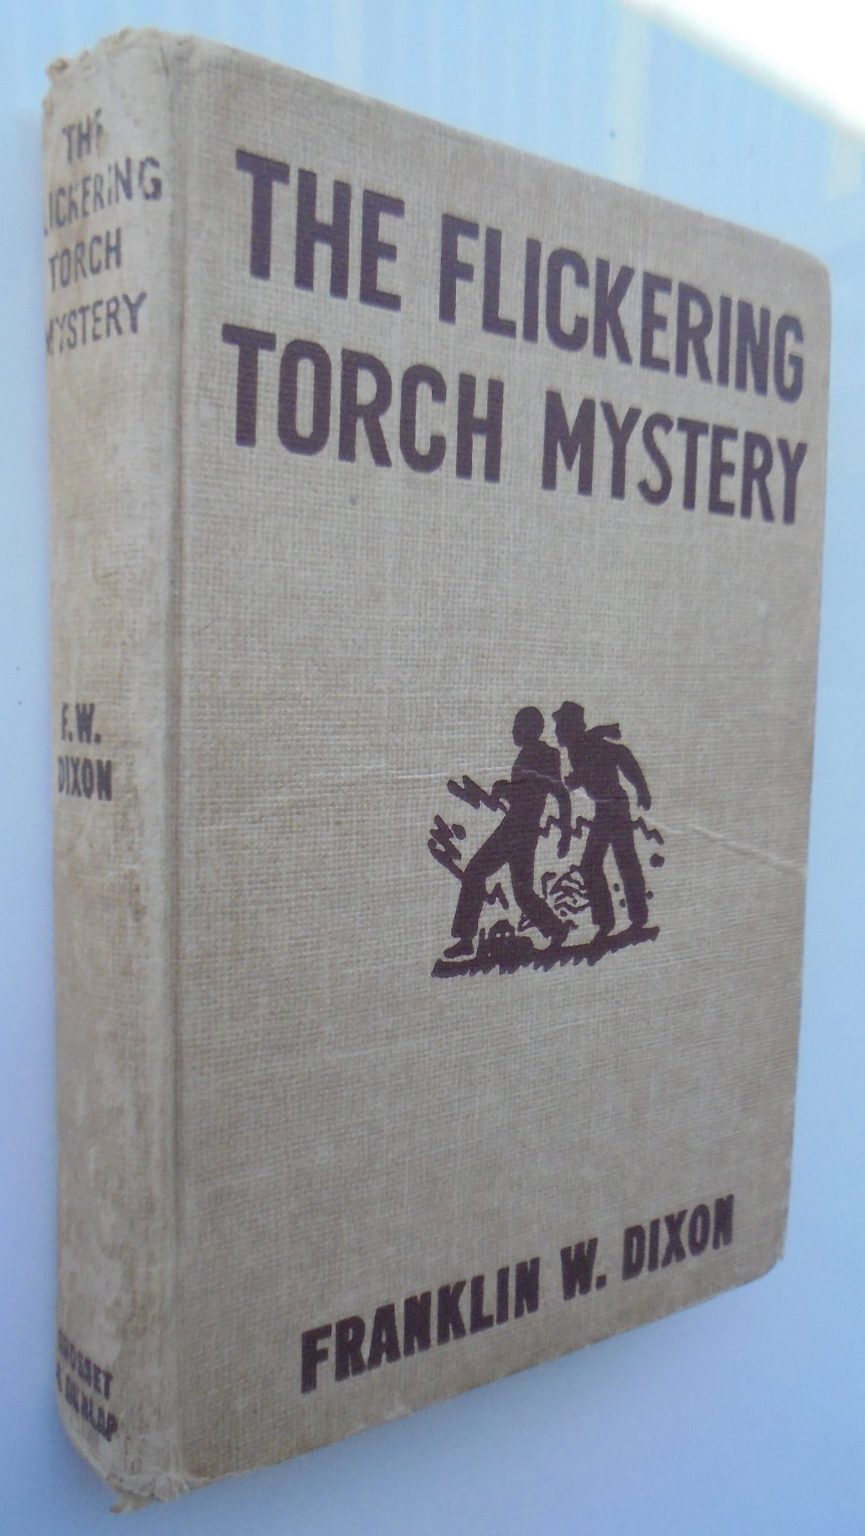 2x Hardy Boys. The Flickering Torch Mystery 1943, & Secret of the Caves 1953